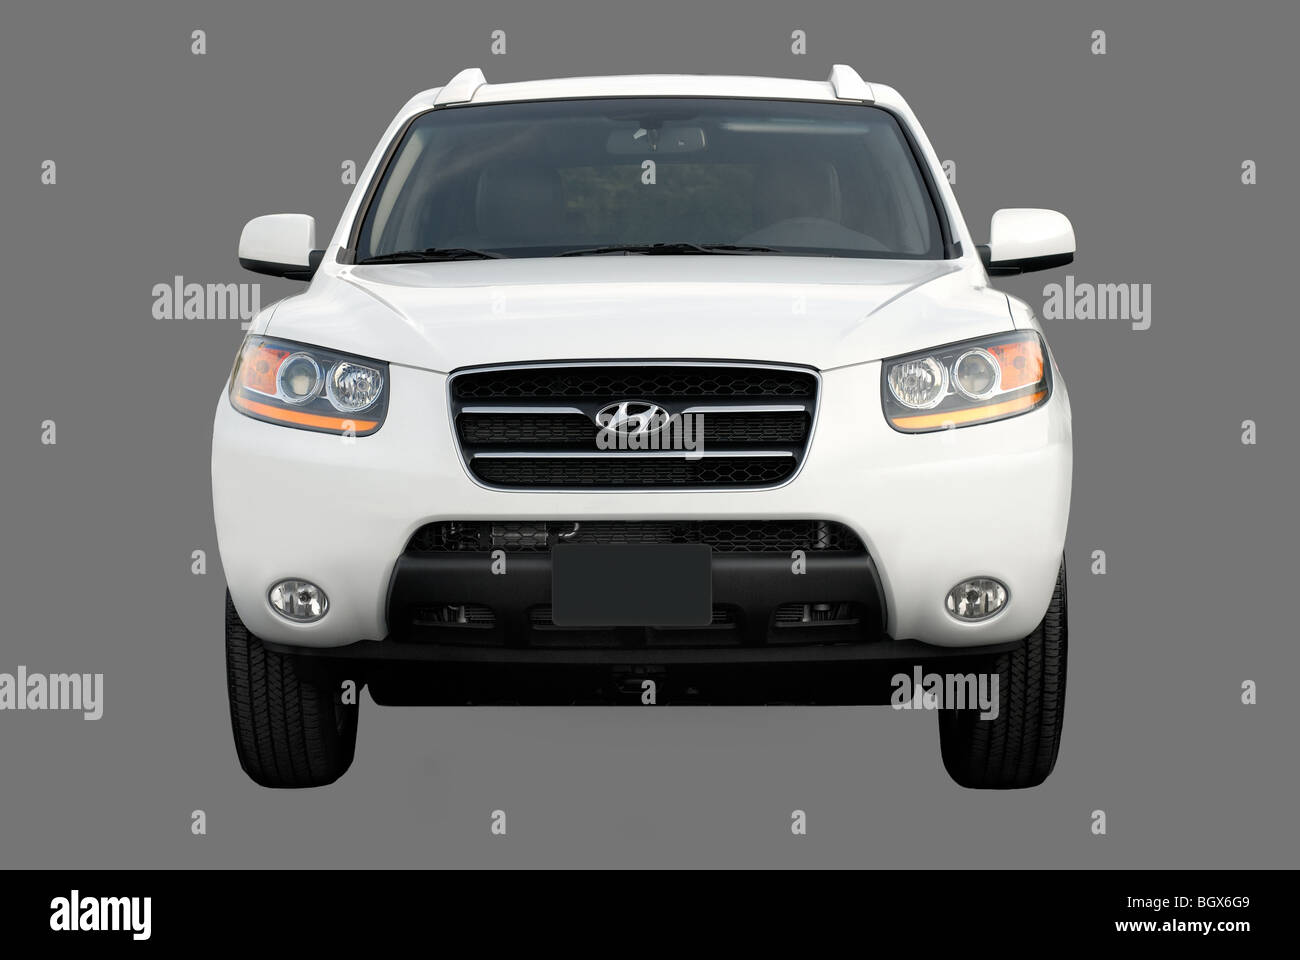 Front view cut-out of a  Hyundai Santa Fe, a mid-size crossover SUV.  EDITORIAL USE ONLY Stock Photo